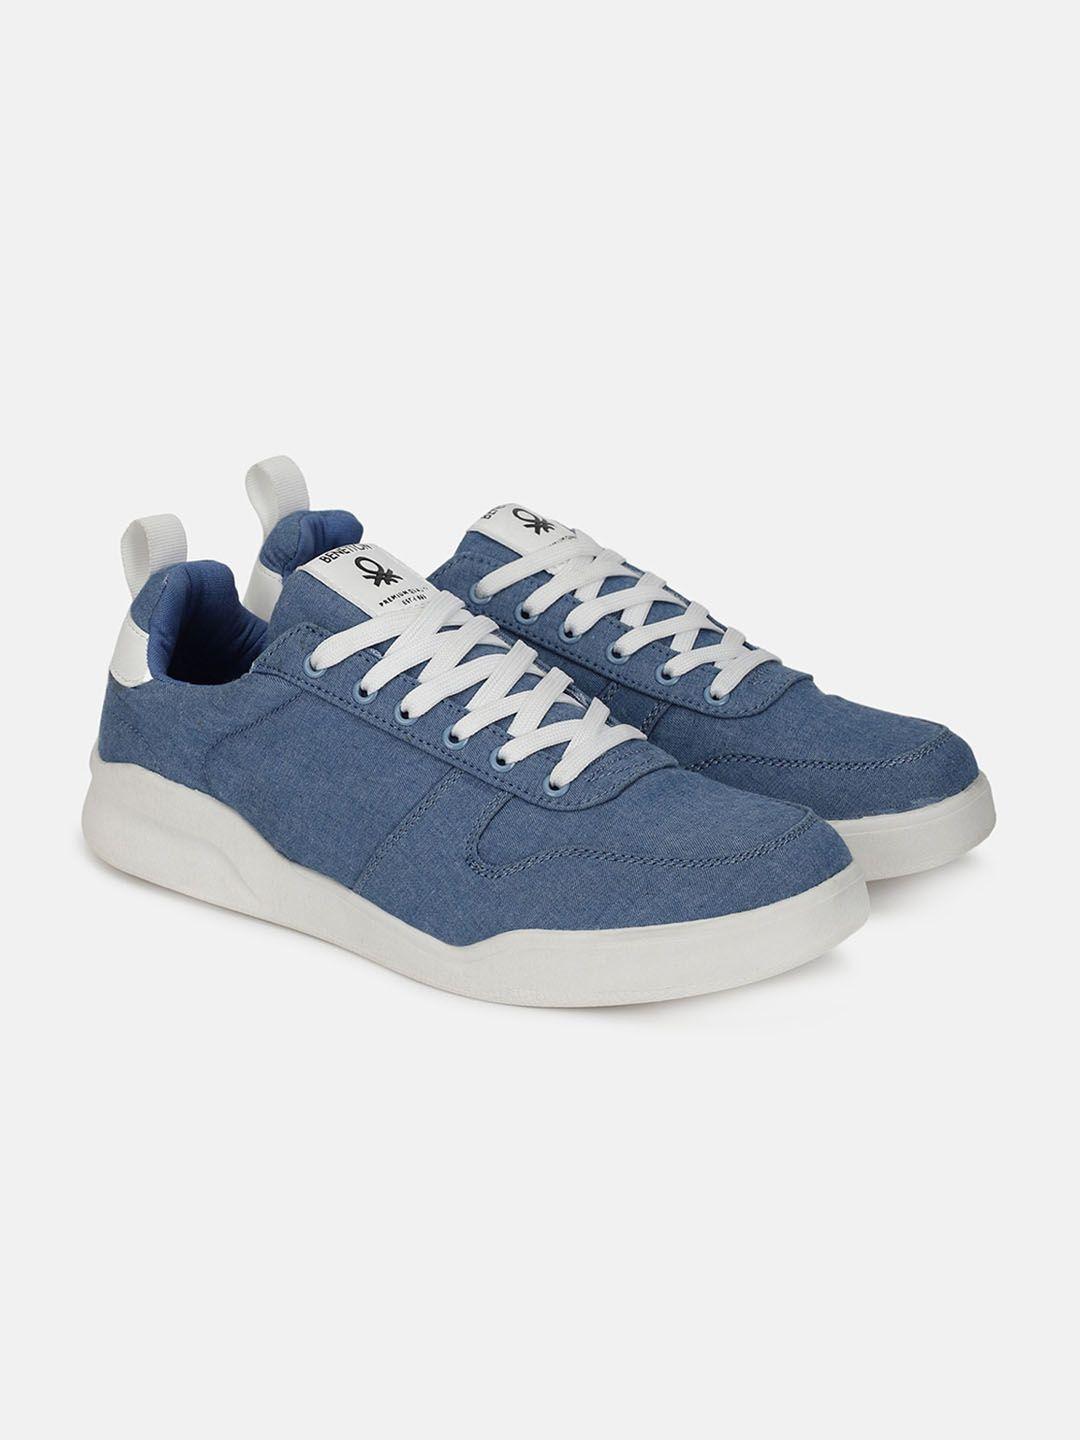 united colors of benetton men canvas lightweight sneakers